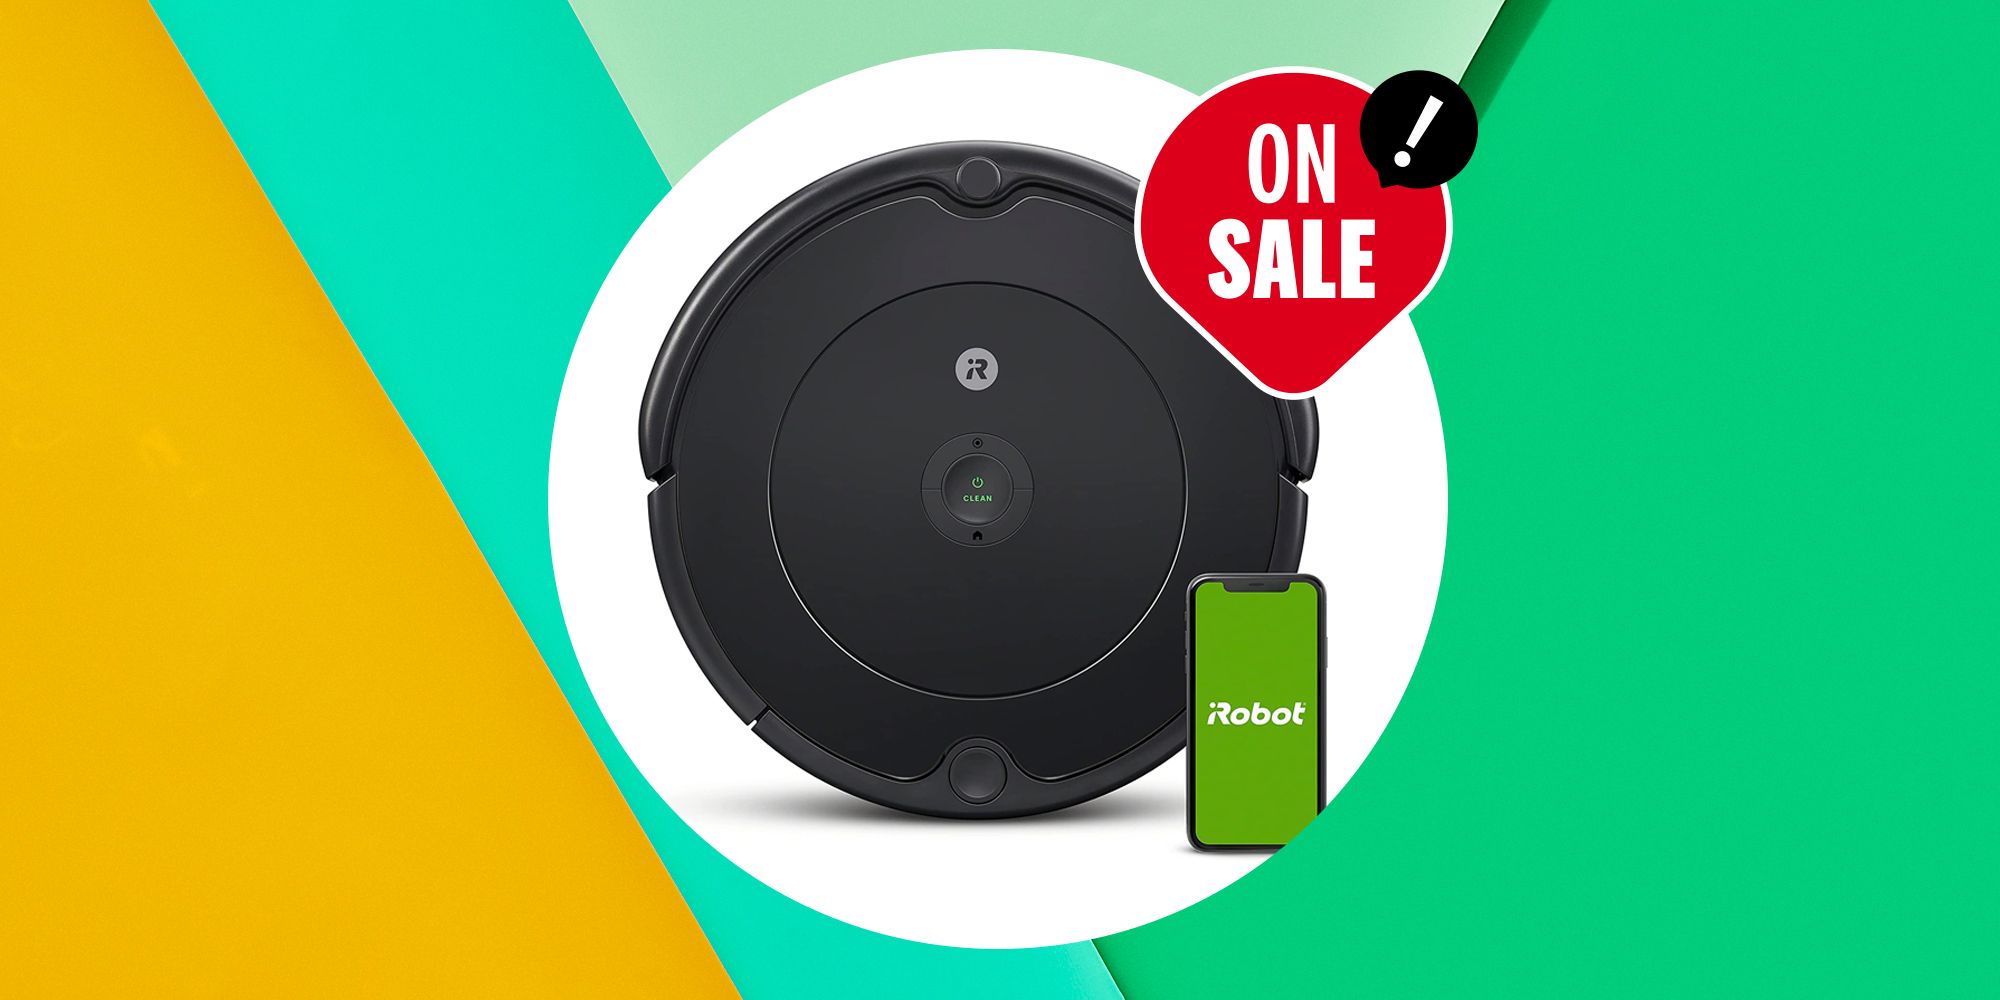 This Amazon iRobot Vacuum On Sale For Almost $100